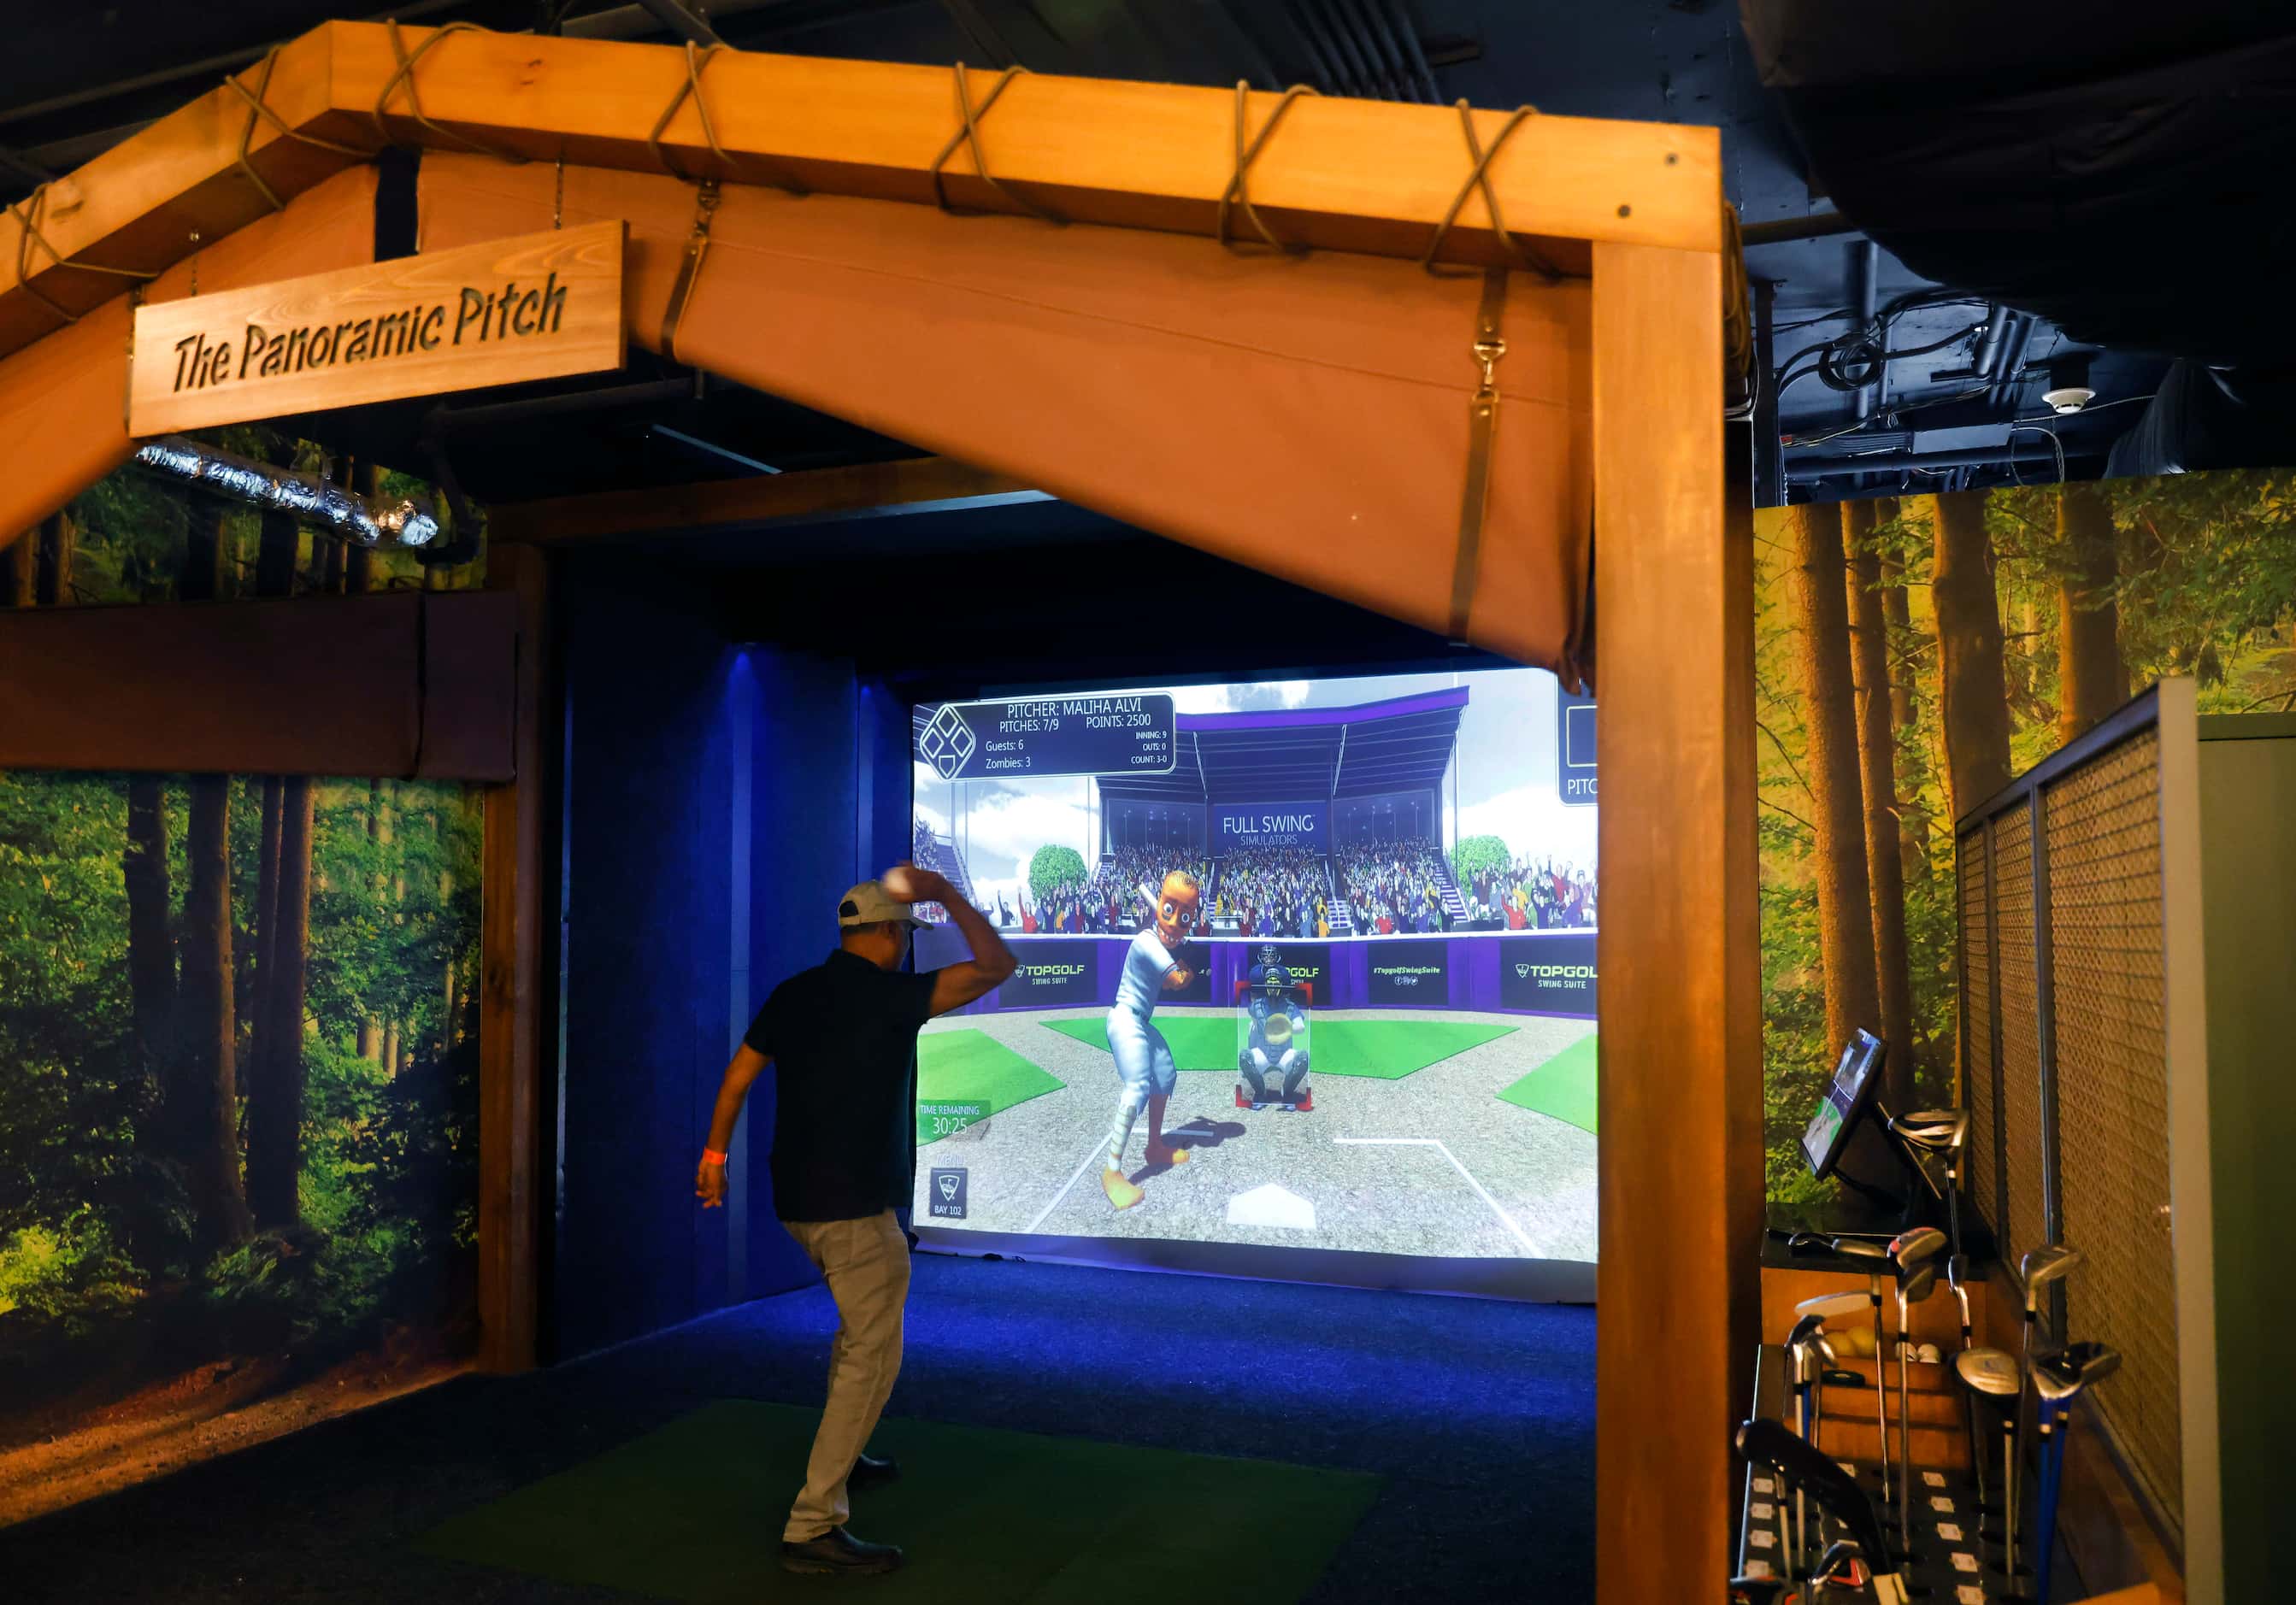 Shon Ali of Houston tosses a pitch in the Panoramic Pitch booth in The Grounds by TopGolf...